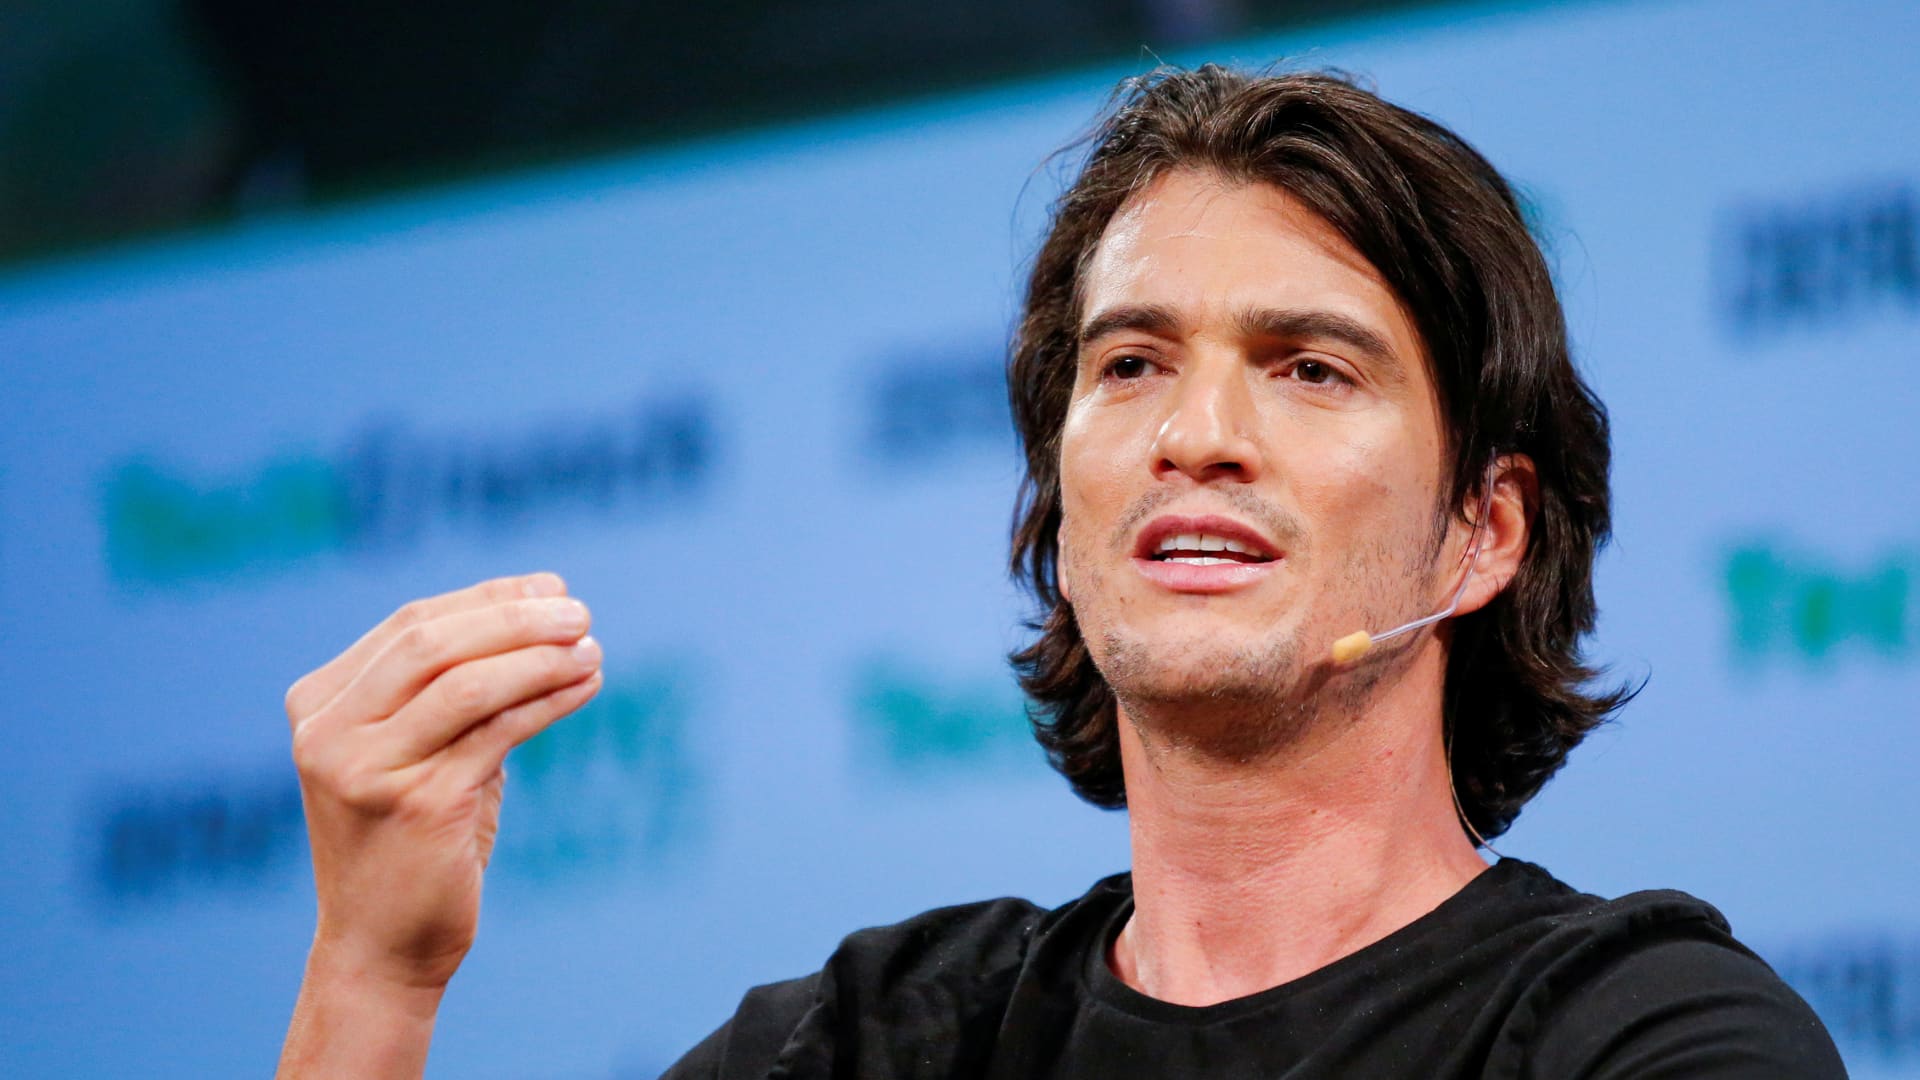 Adam Neumann, Founder and former CEO of WeWork.